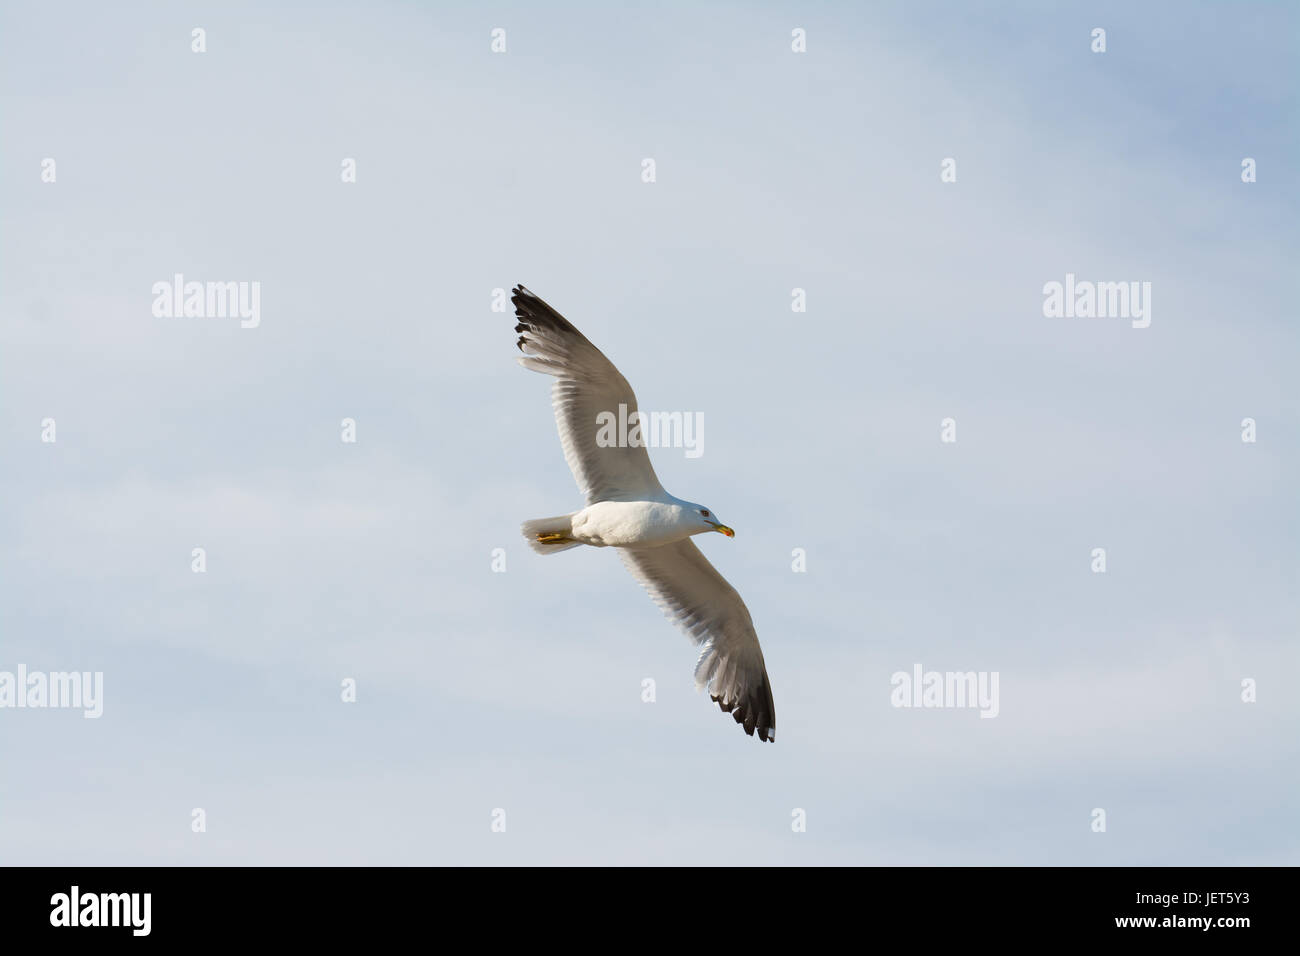 Flying seagull Stock Photo